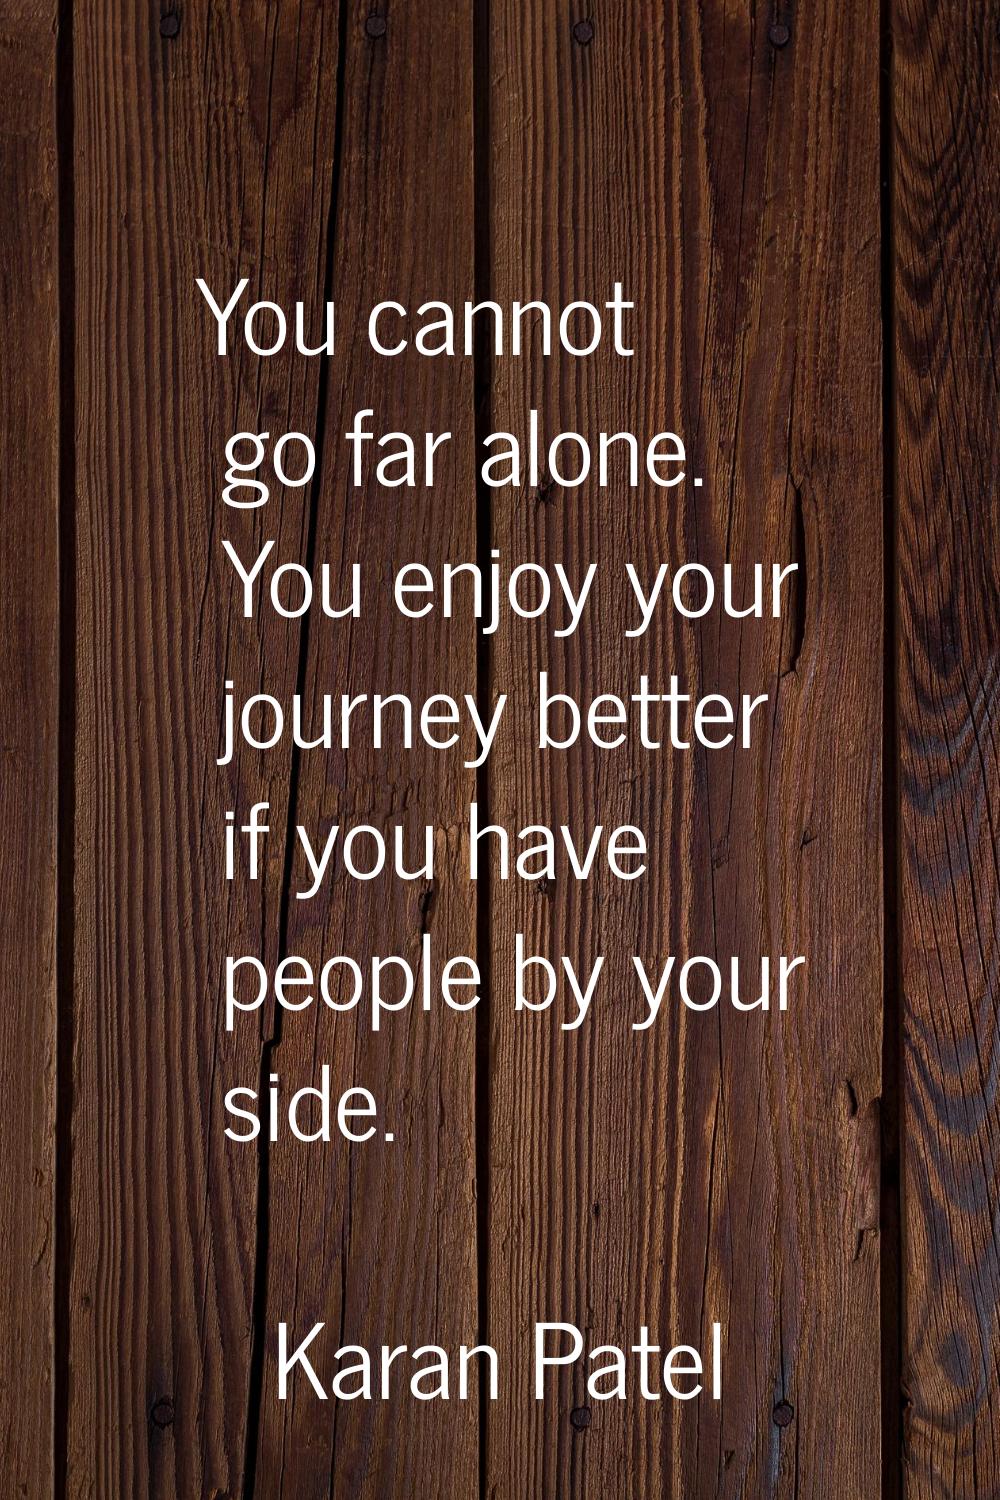 You cannot go far alone. You enjoy your journey better if you have people by your side.